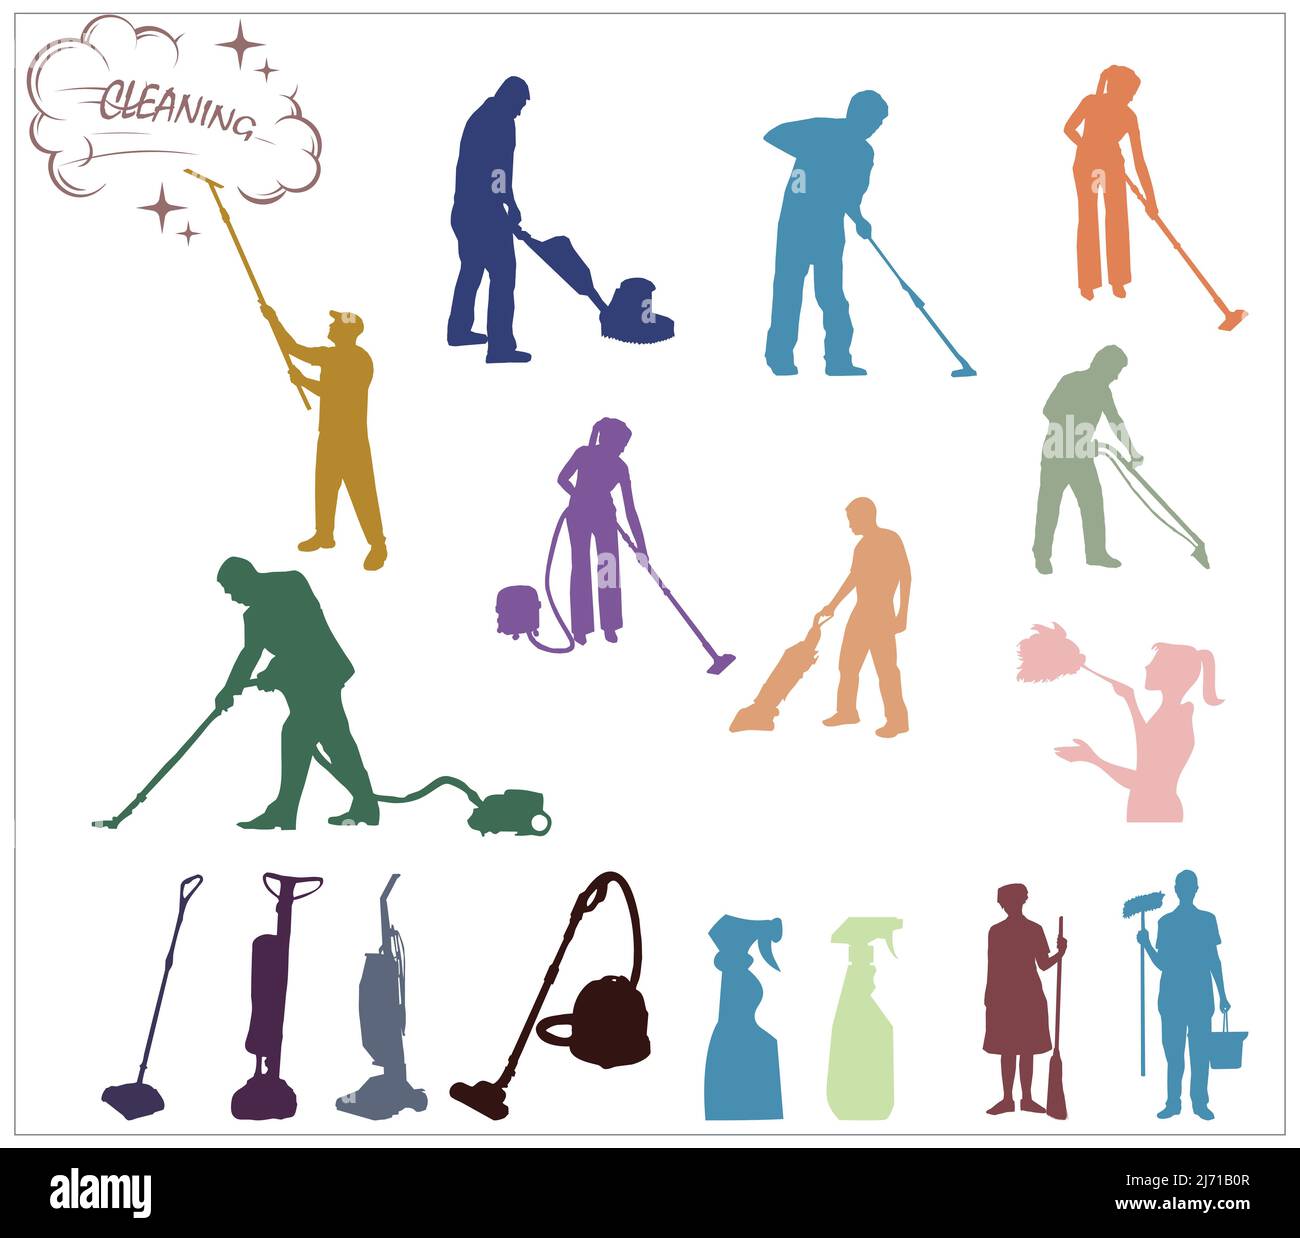 People With Cleaning Tools And Accessories Stock Vector